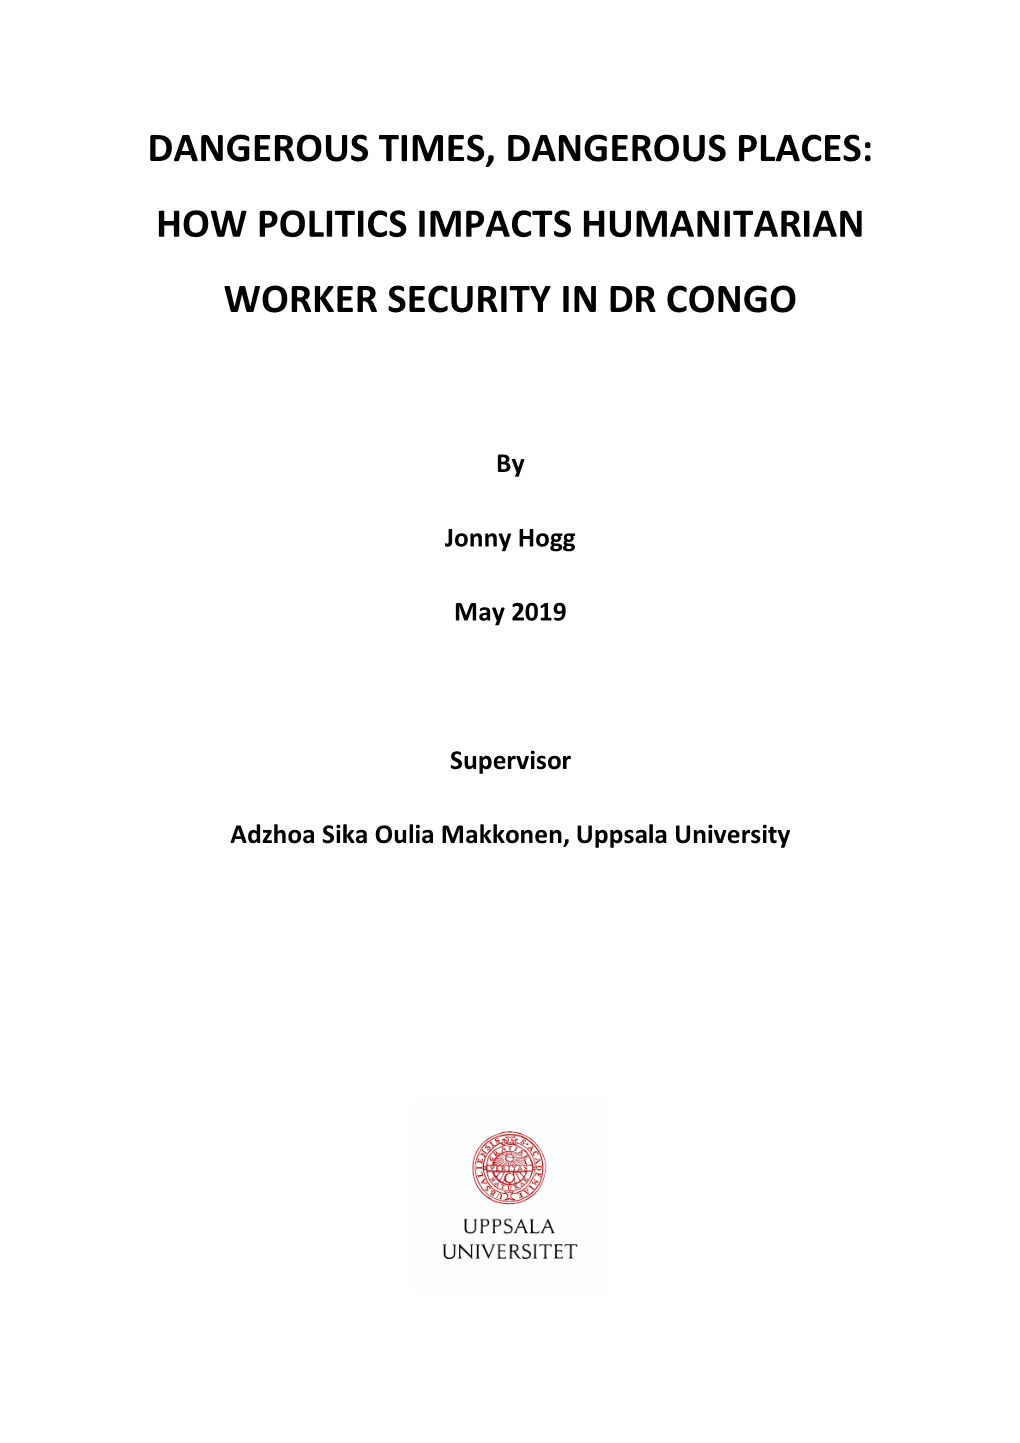 How Politics Impacts Humanitarian Worker Security in Dr Congo